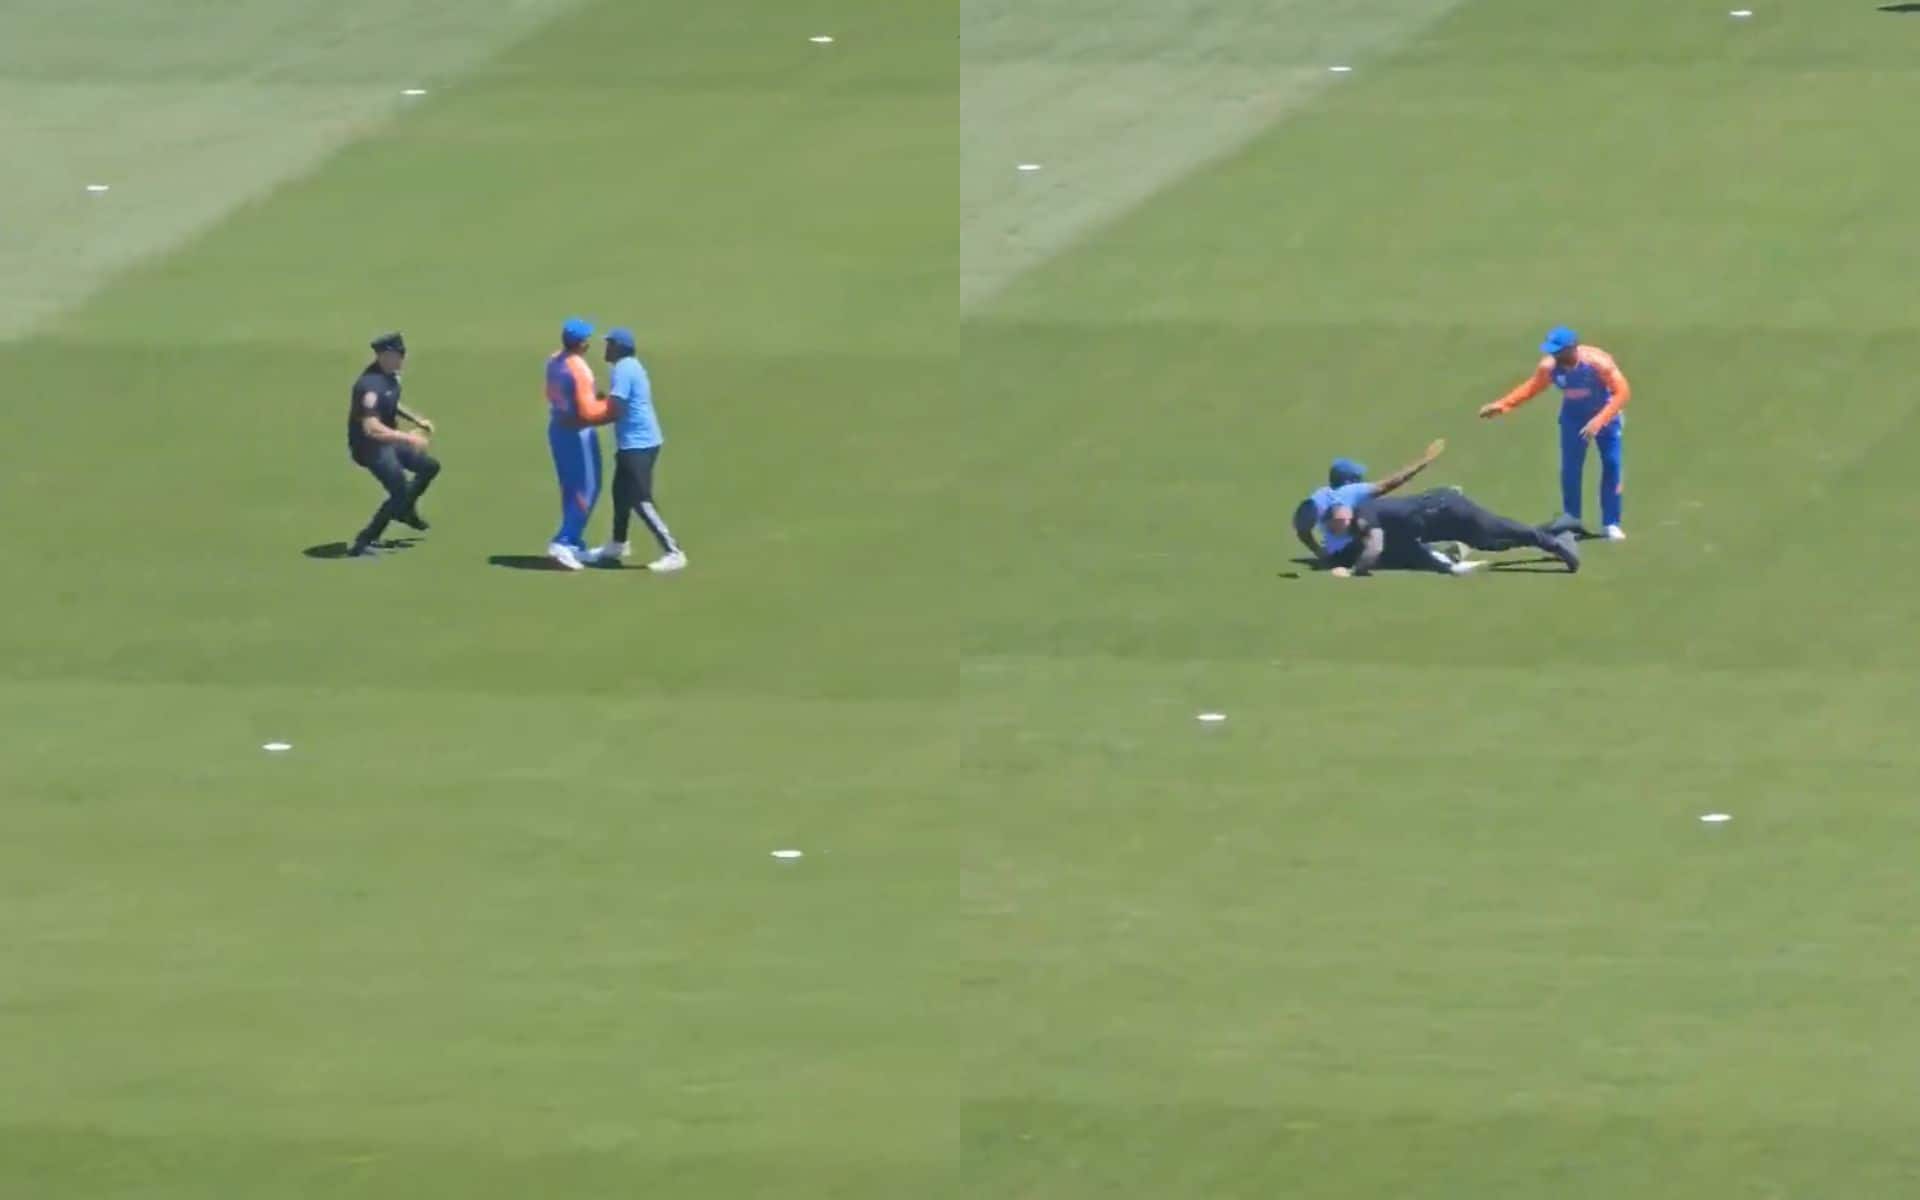 Rohit Sharma asks US Police to be gentle with pitch invader (X.com)